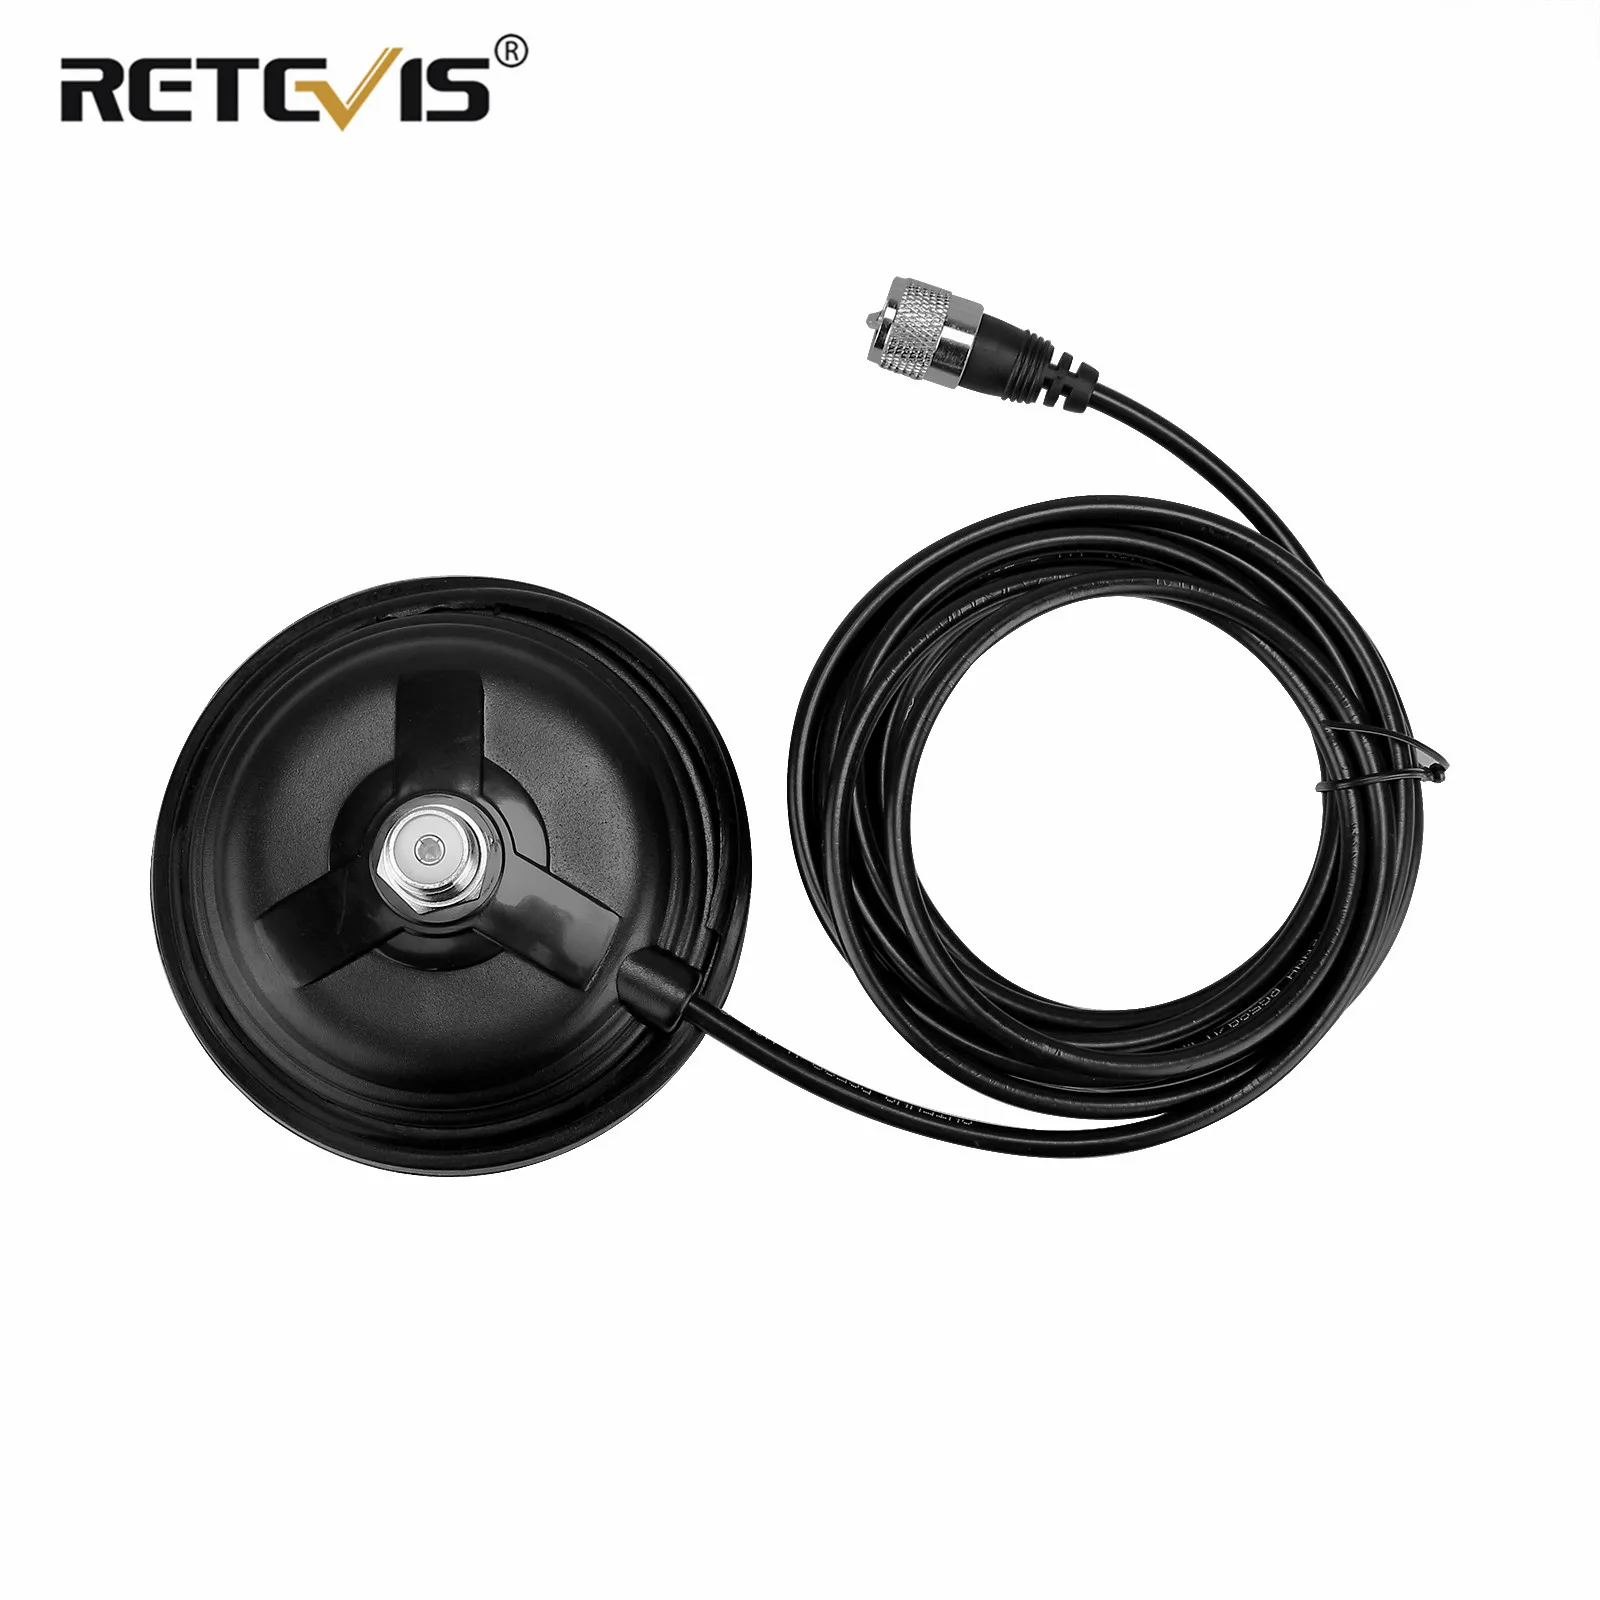 

Retevis CA35 Magnetic Roof Mount Base SL16-K with 4m Coaxial Cable SL16-J PL-259/SO-239 UHF Mobile Antenna Car Radio Accessories